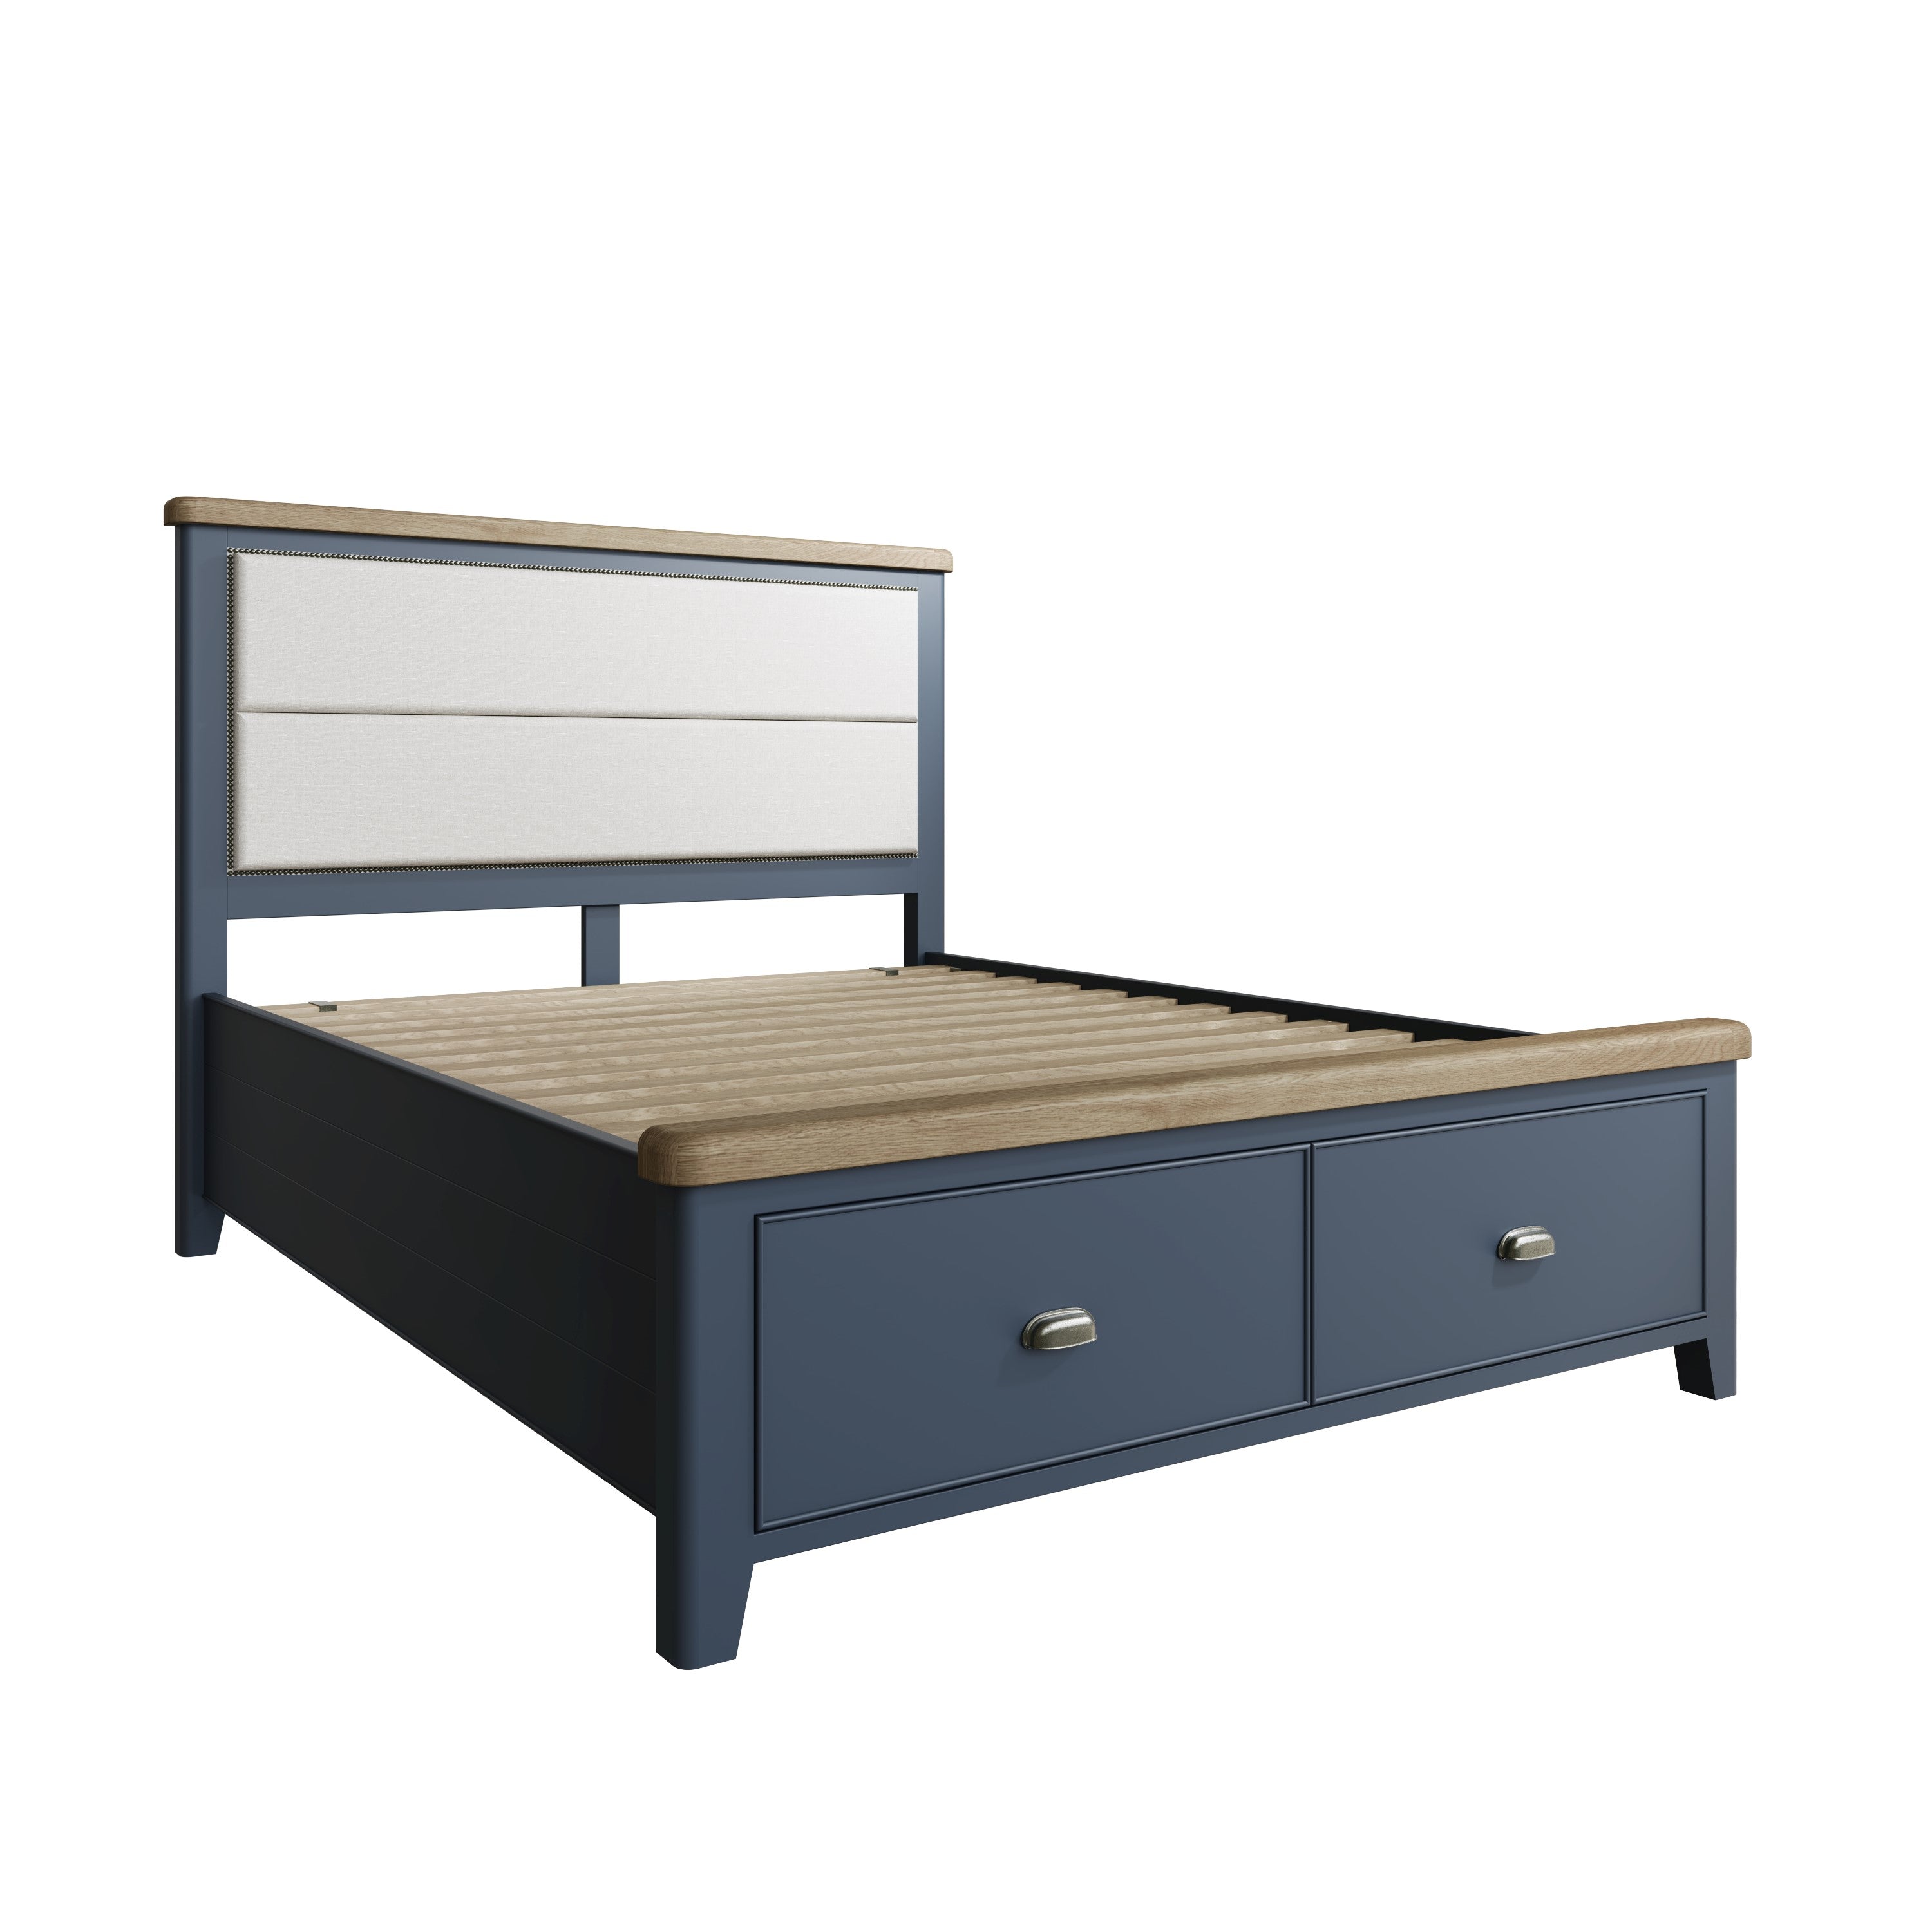 Rogate Blue 4'6" Double Bed Frame - Fabric Headboard & Drawers